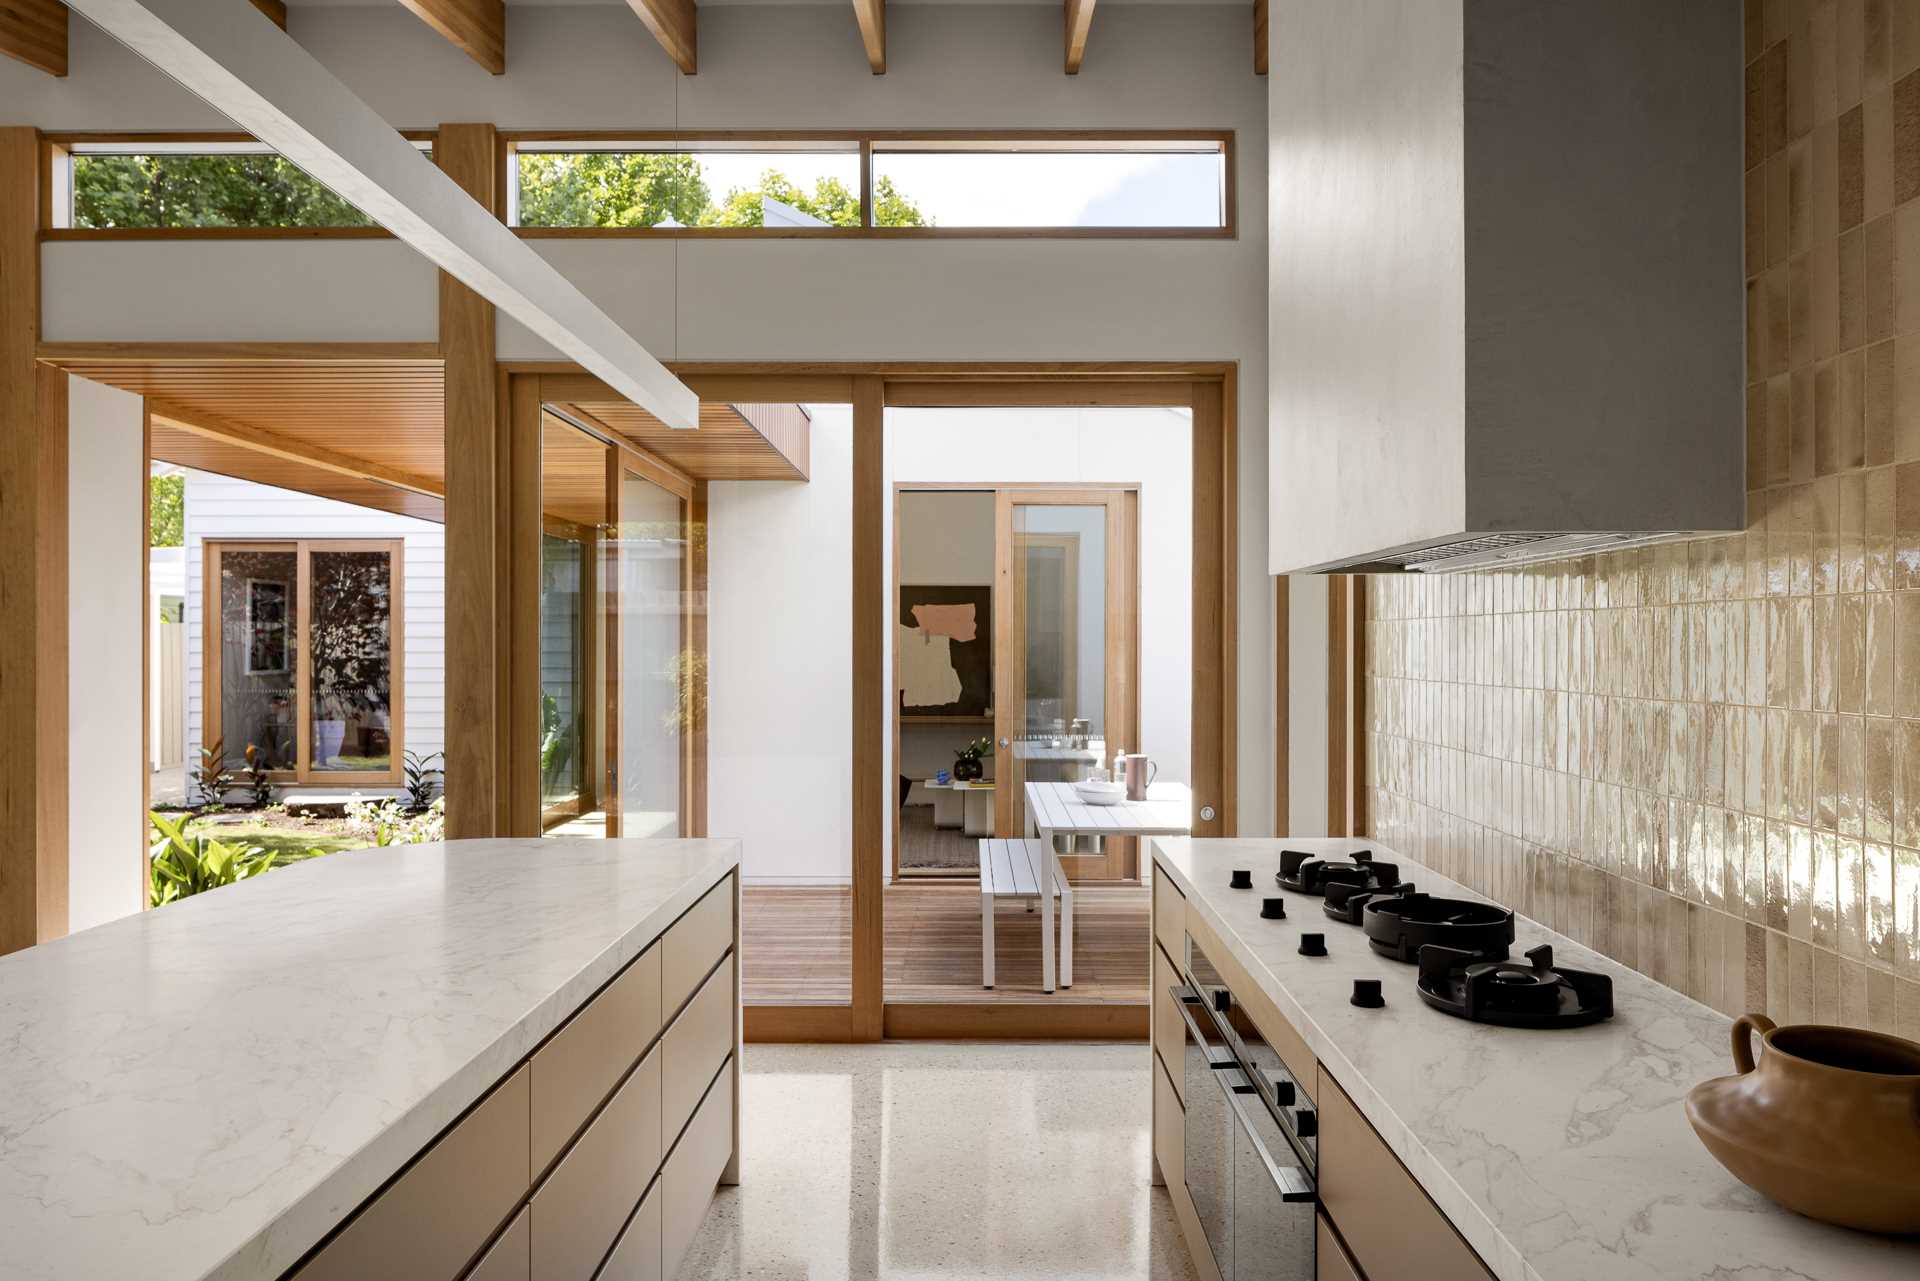 This kitchen has a sliding glass door that connects to the outdoor dining area.